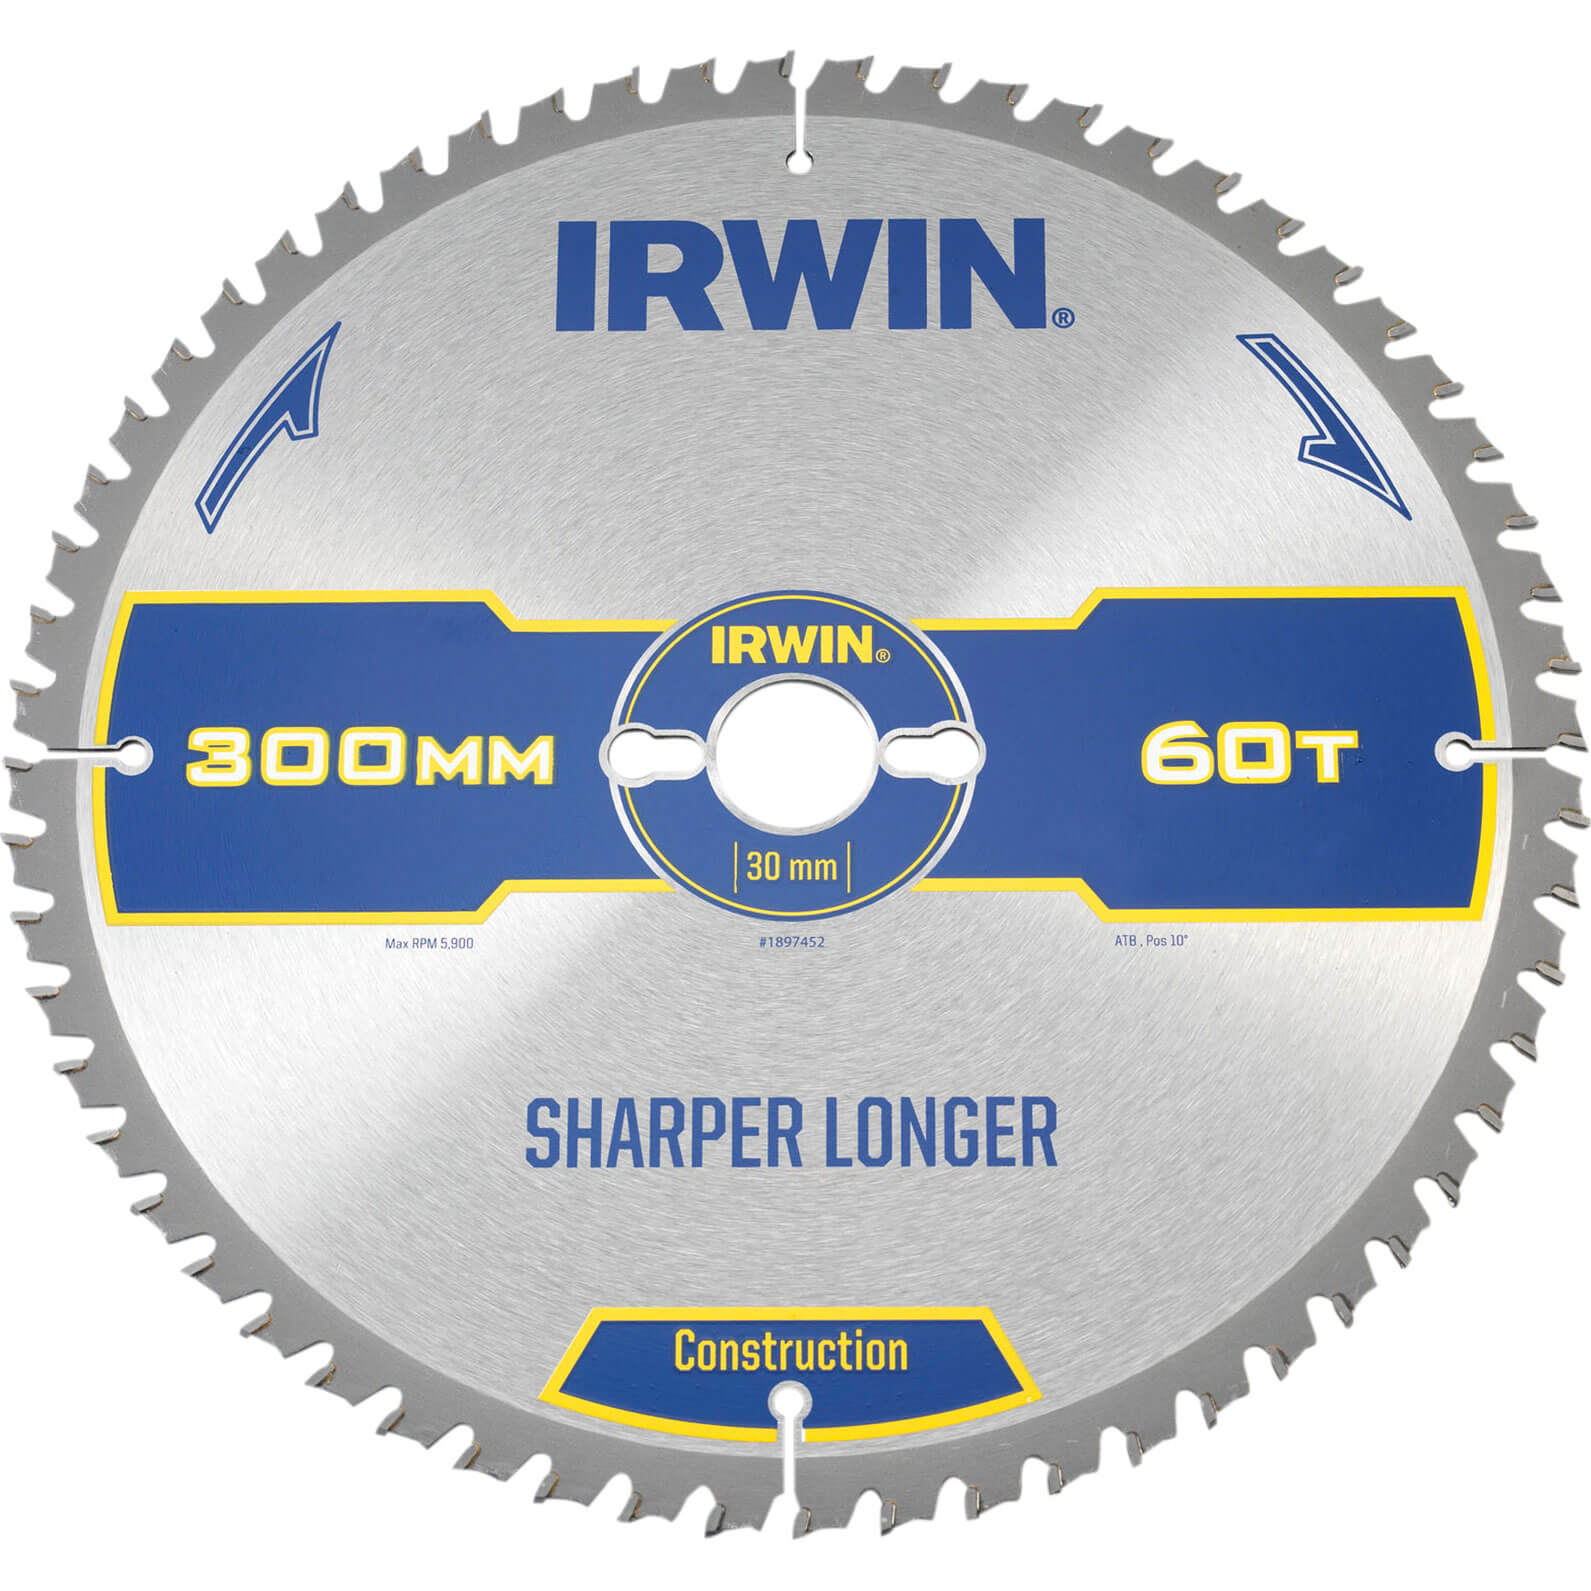 Image of Irwin ATB Ultra Construction Circular Saw Blade 300mm 60T 30mm